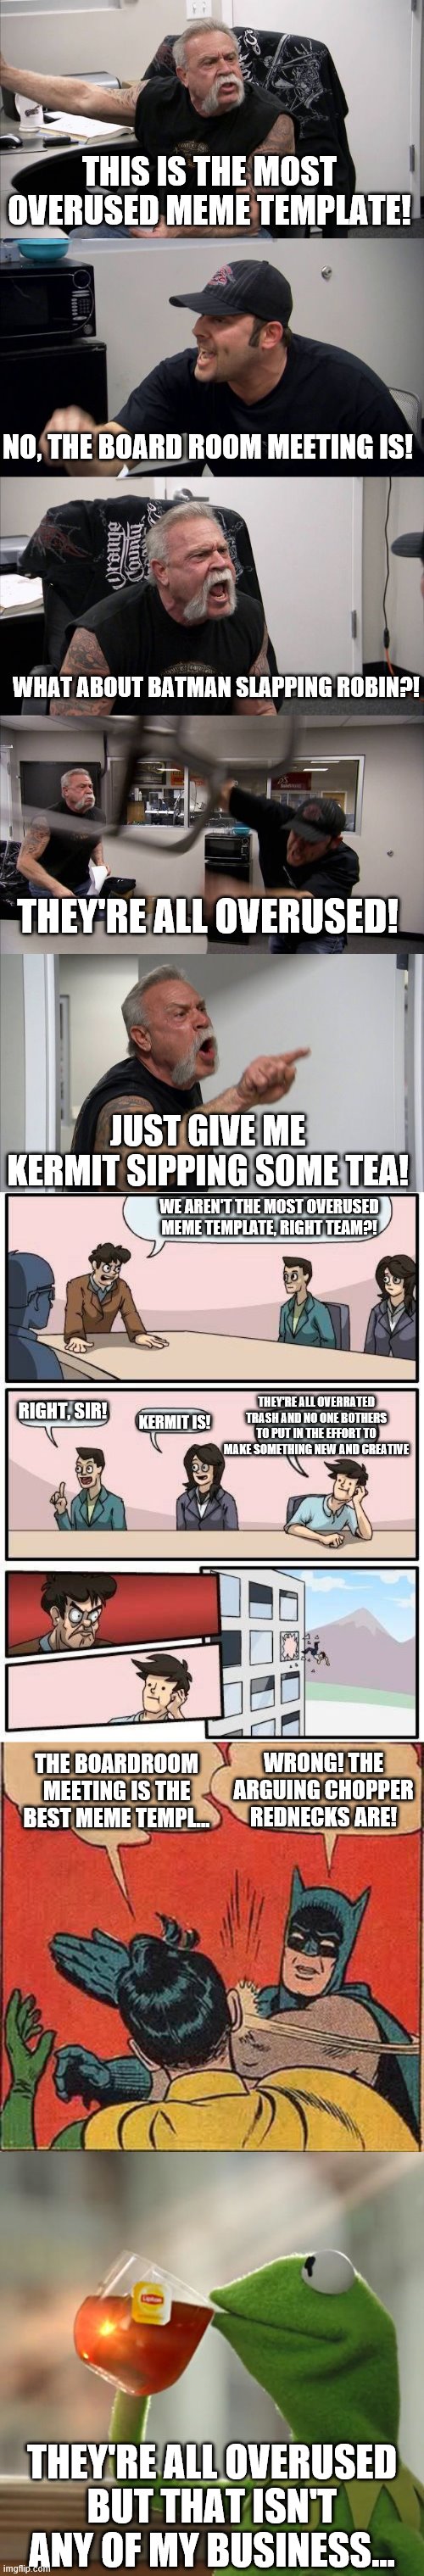 Overrused Meme Templates | THIS IS THE MOST OVERUSED MEME TEMPLATE! NO, THE BOARD ROOM MEETING IS! WHAT ABOUT BATMAN SLAPPING ROBIN?! THEY'RE ALL OVERUSED! JUST GIVE ME KERMIT SIPPING SOME TEA! WE AREN'T THE MOST OVERUSED MEME TEMPLATE, RIGHT TEAM?! RIGHT, SIR! THEY'RE ALL OVERRATED TRASH AND NO ONE BOTHERS TO PUT IN THE EFFORT TO MAKE SOMETHING NEW AND CREATIVE; KERMIT IS! WRONG! THE ARGUING CHOPPER REDNECKS ARE! THE BOARDROOM MEETING IS THE BEST MEME TEMPL... THEY'RE ALL OVERUSED BUT THAT ISN'T ANY OF MY BUSINESS... | image tagged in memes,batman slapping robin,boardroom meeting suggestion,but that's none of my business,american chopper argument | made w/ Imgflip meme maker